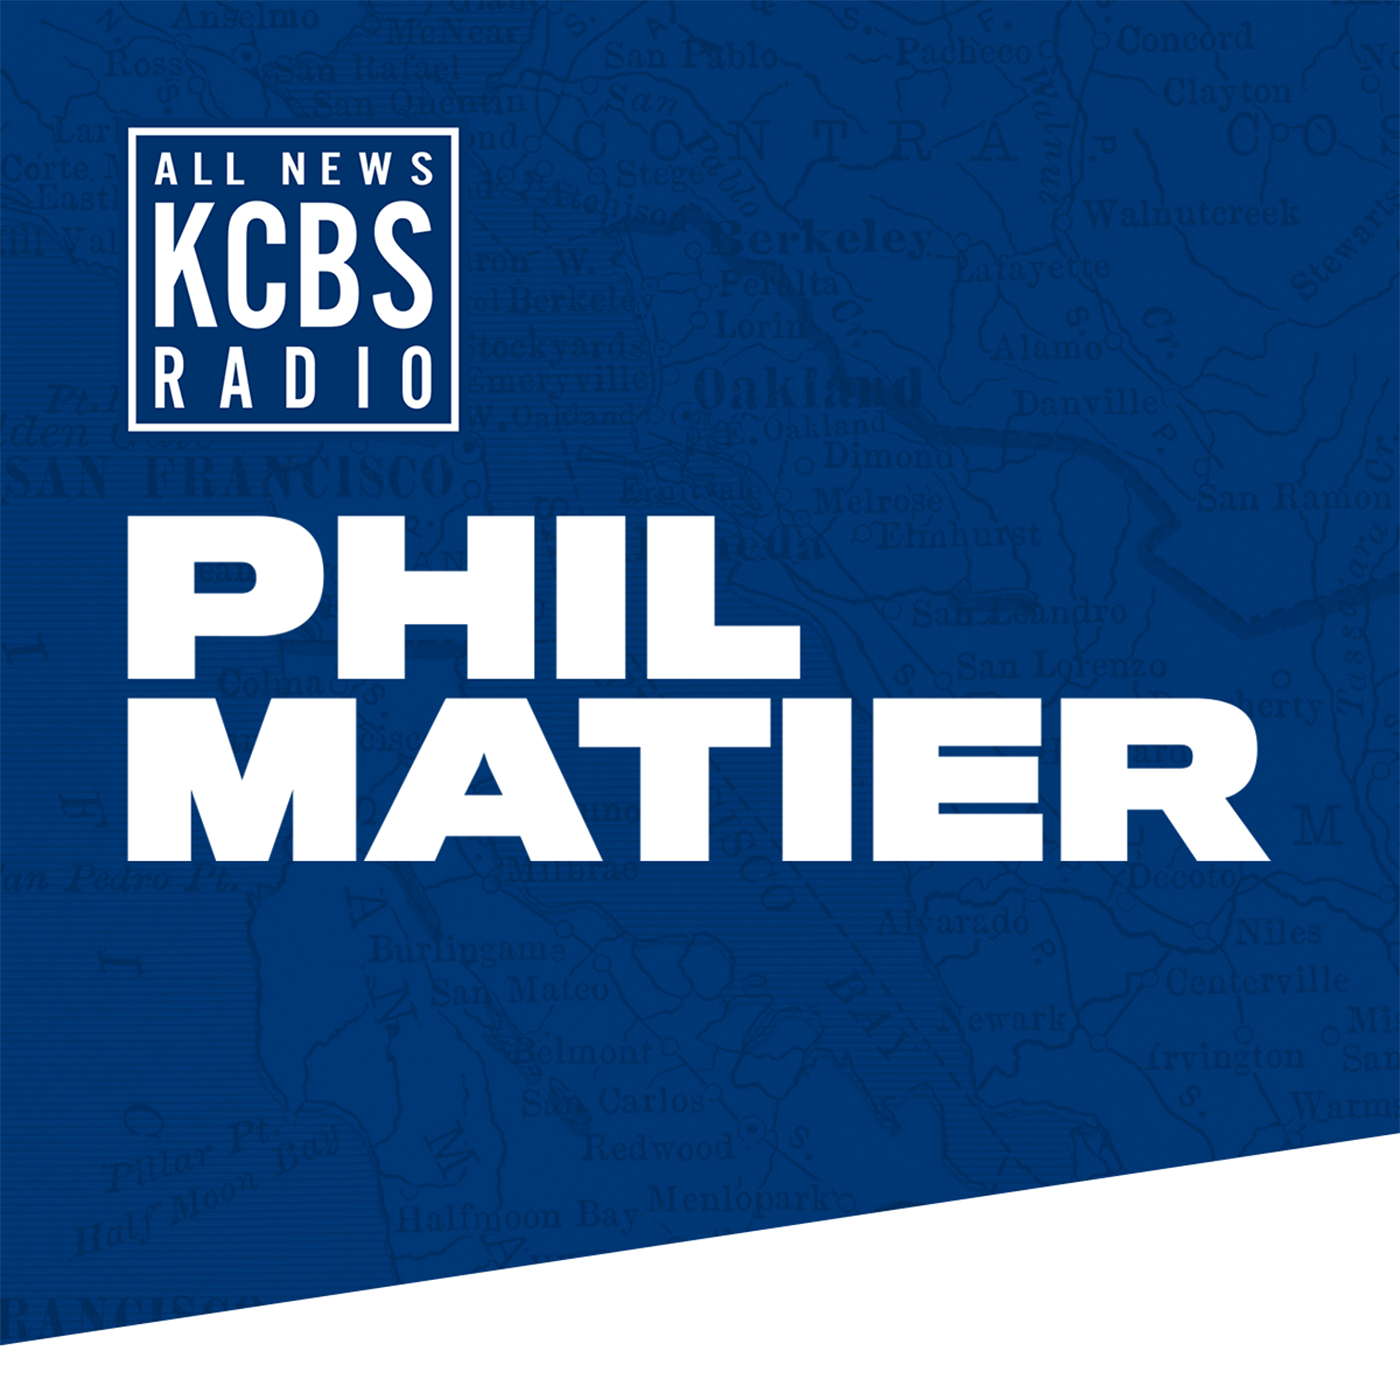 Phil Matier: Governor Newsom has signed a law that makes the state's vote-by-mail law permanent